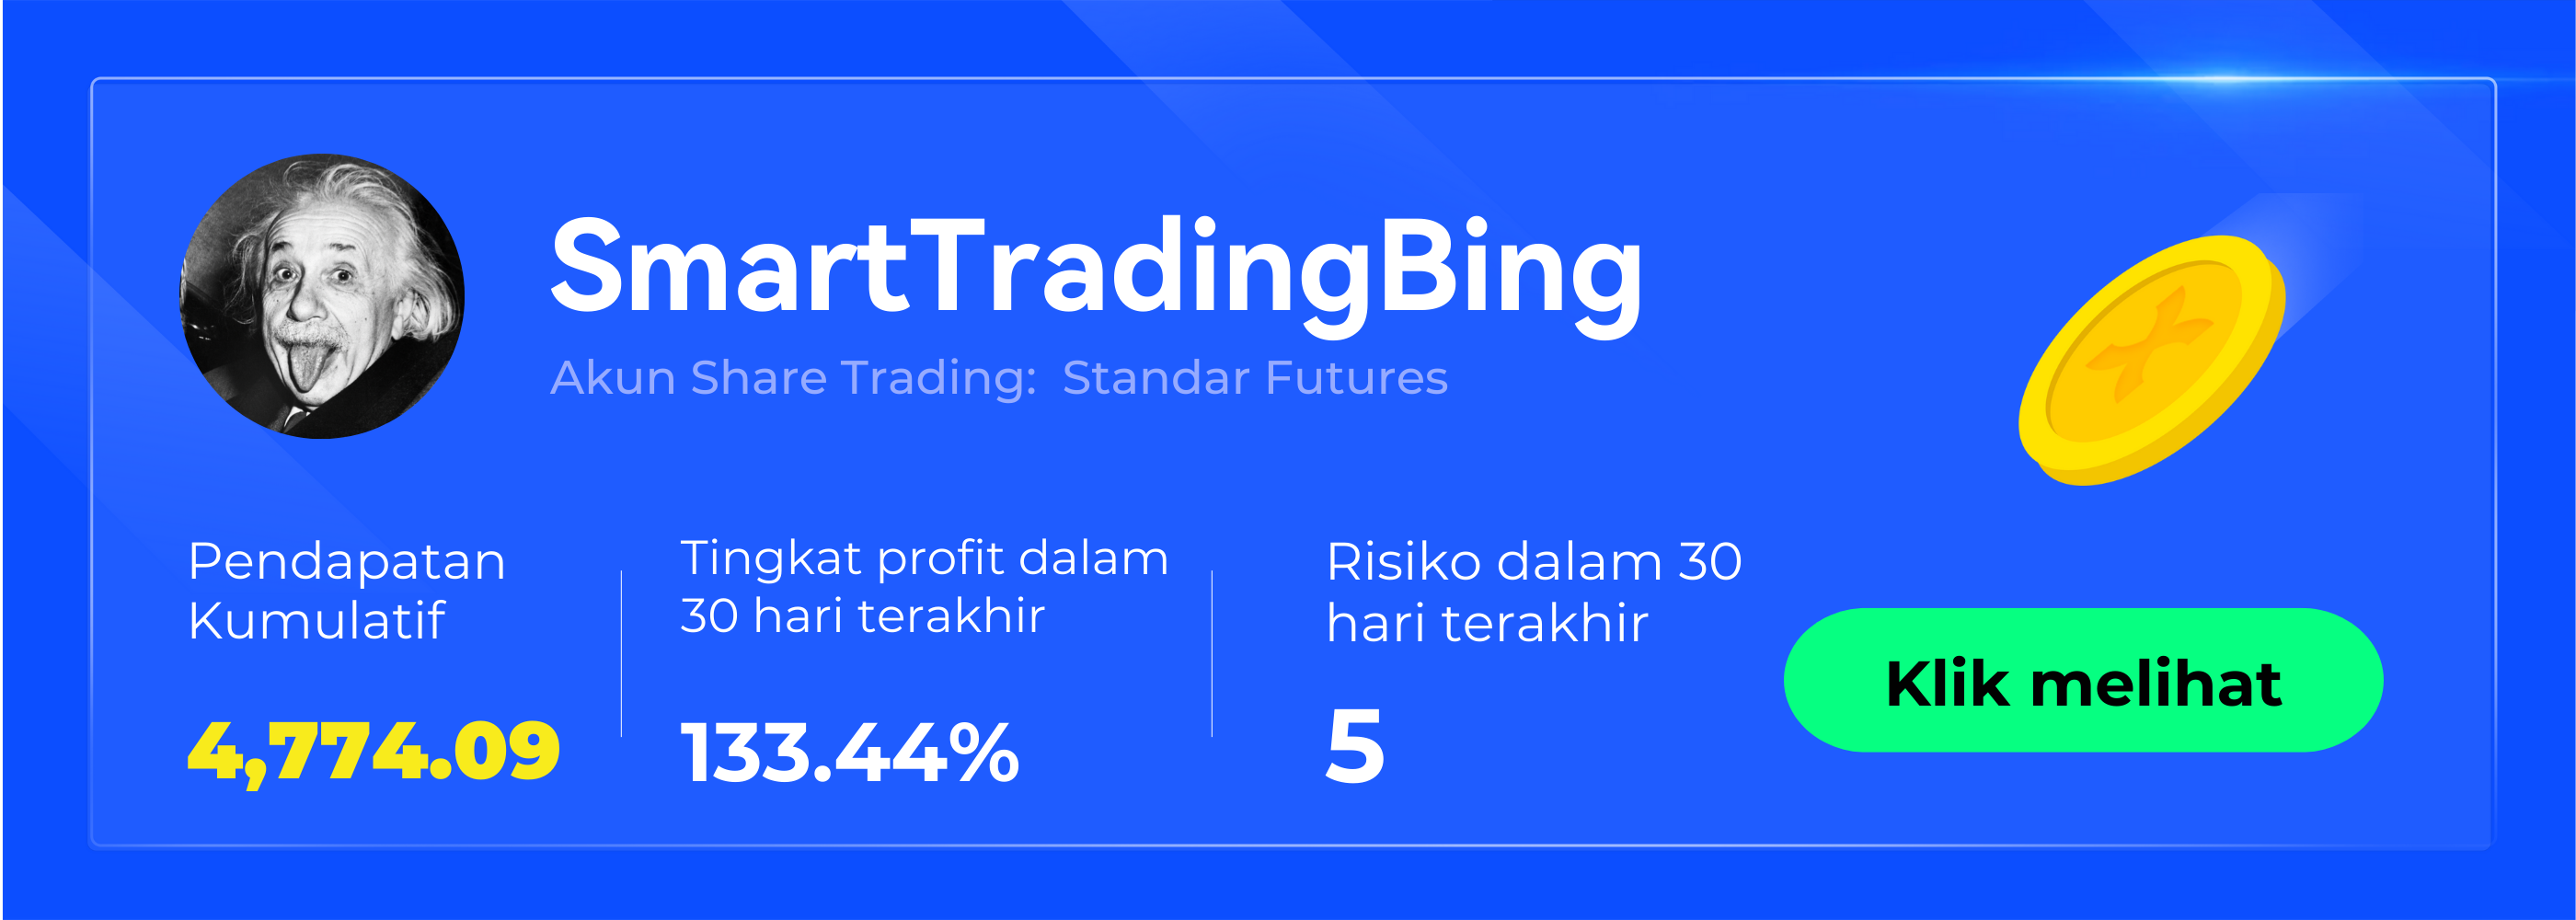 idsmarttrading.png